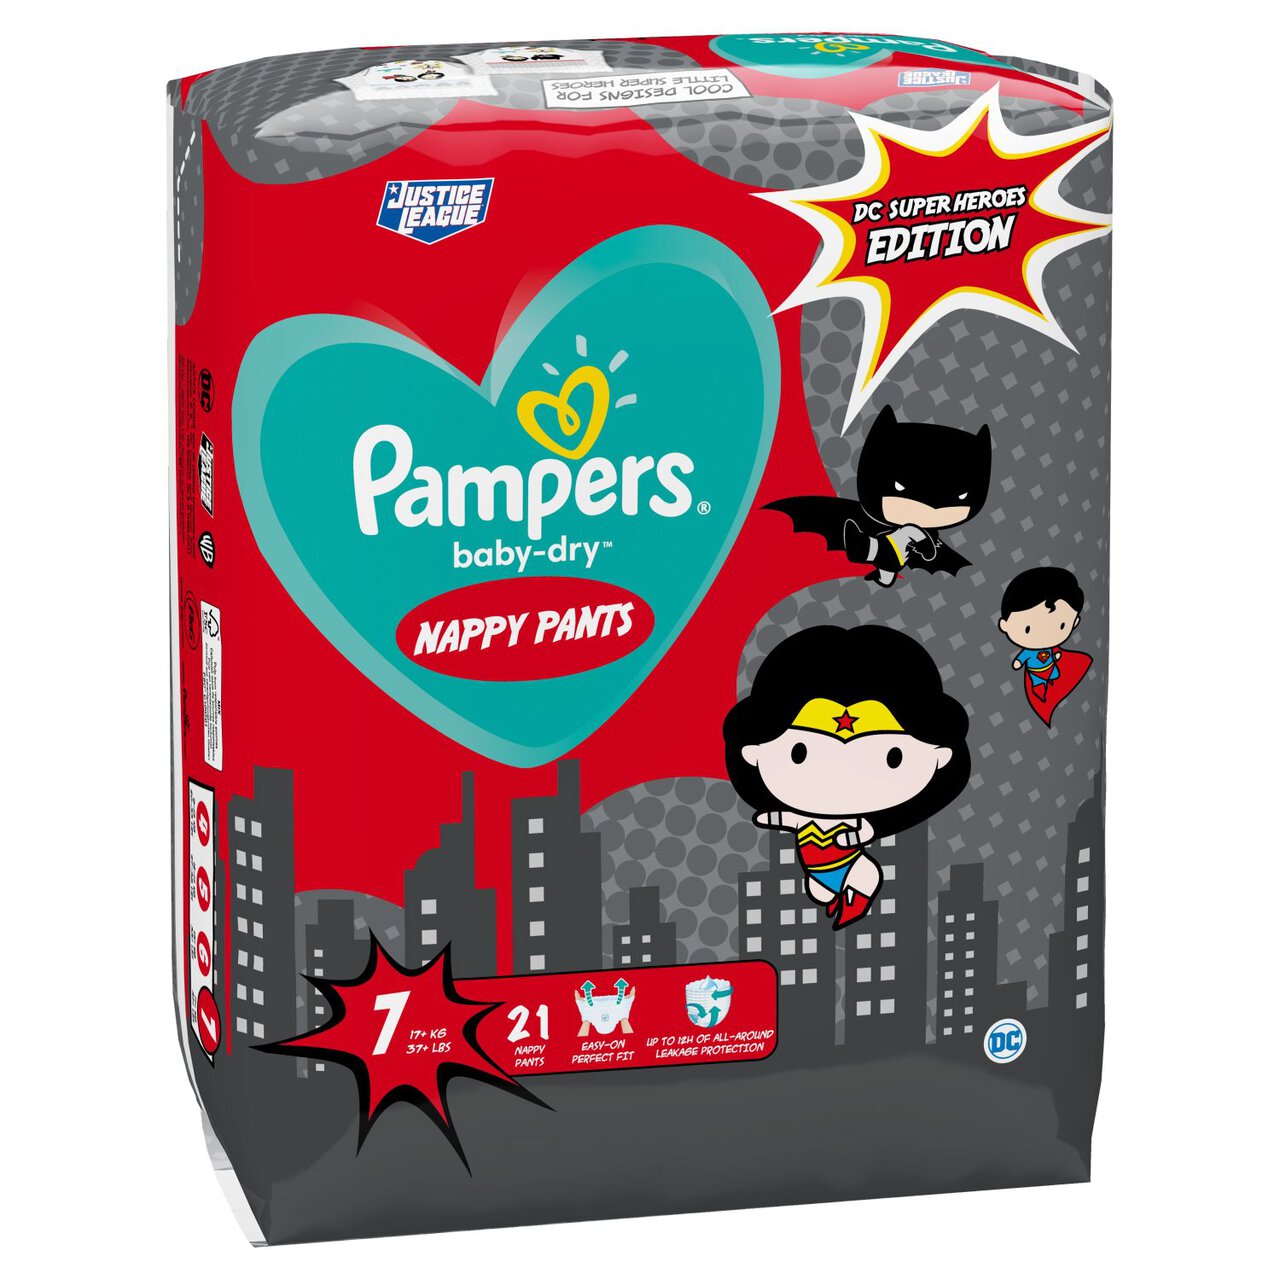 Pampers Baby-Dry Superhero Nappy Pants, Size 7 21 per pack